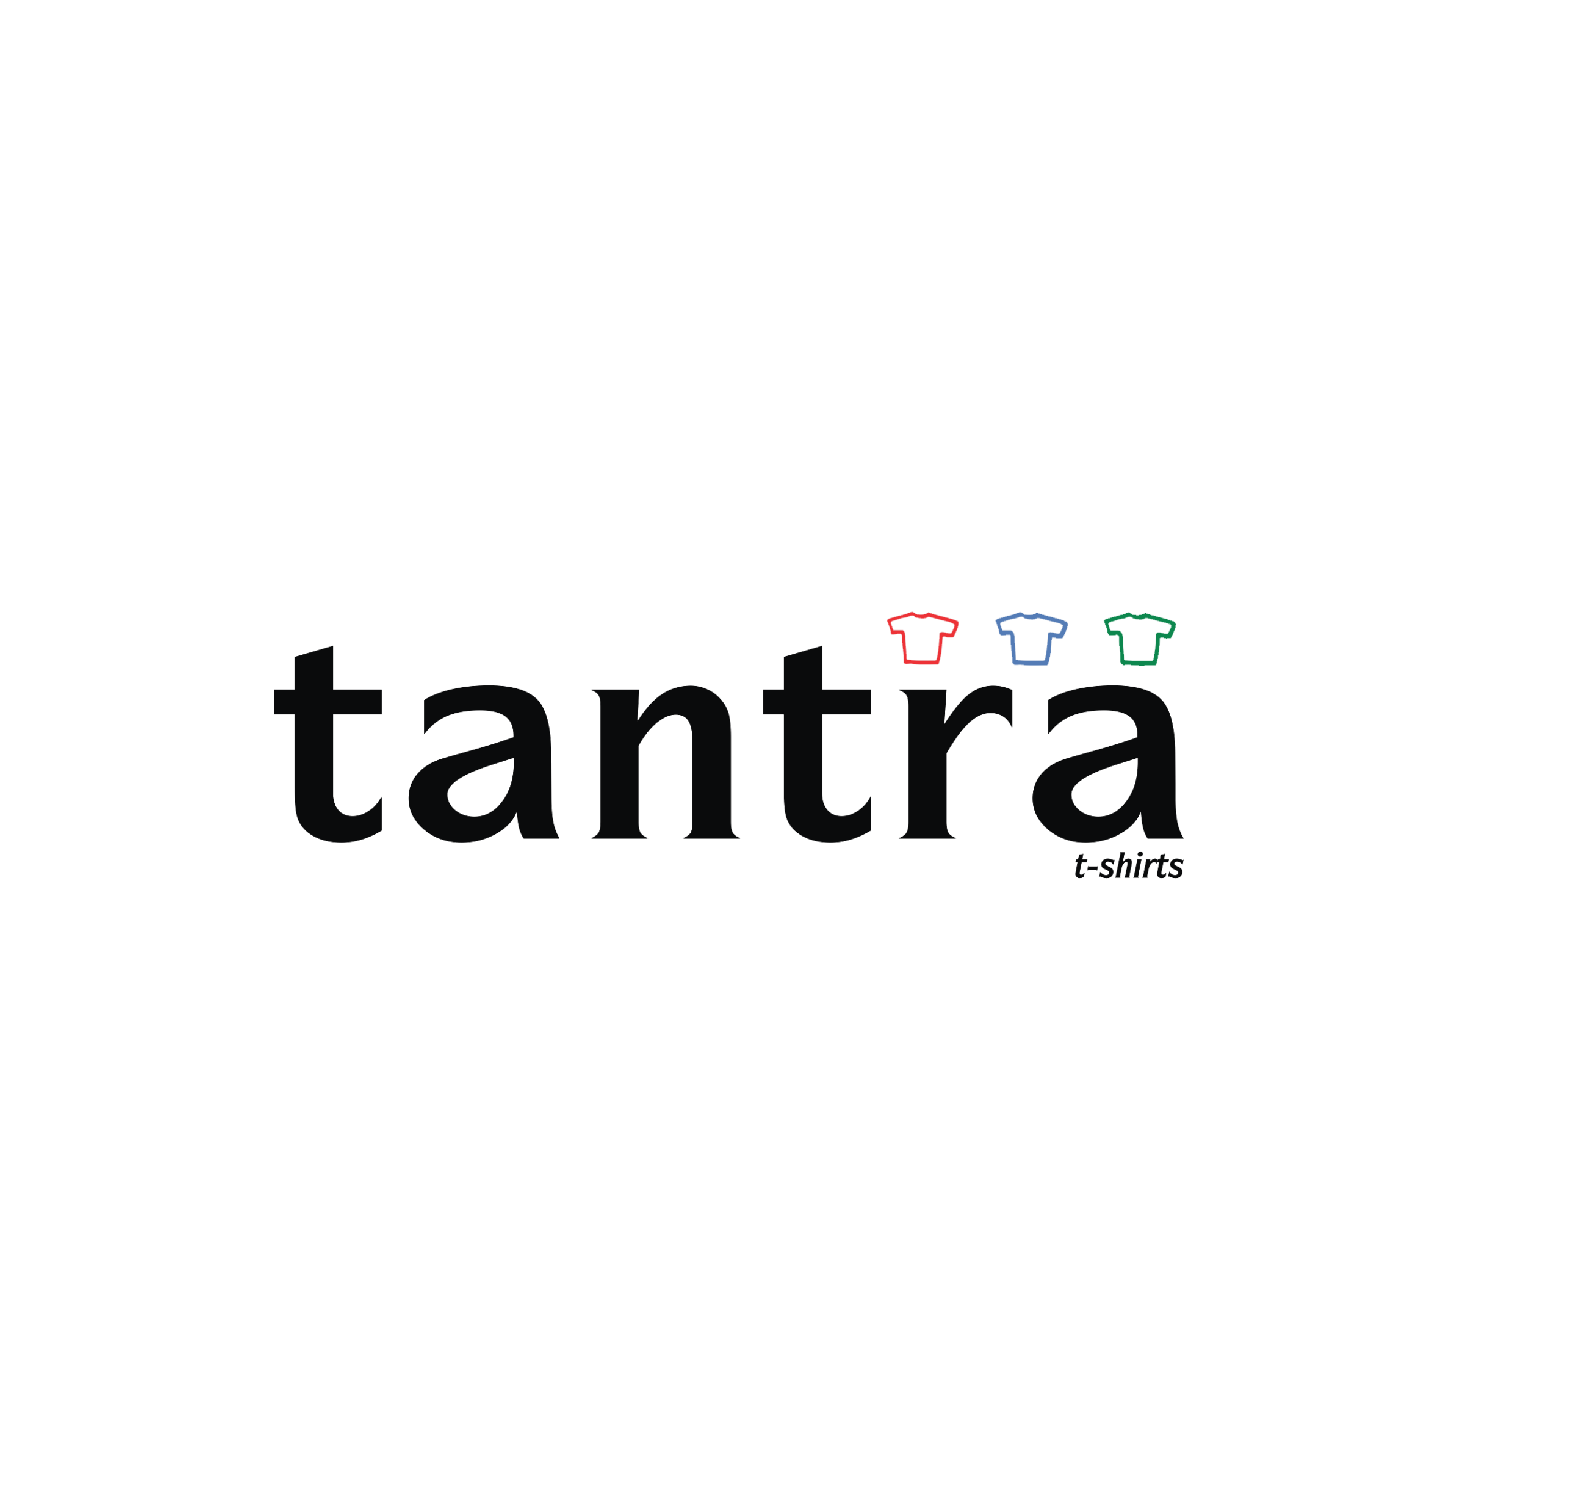 Tantra t-shirts